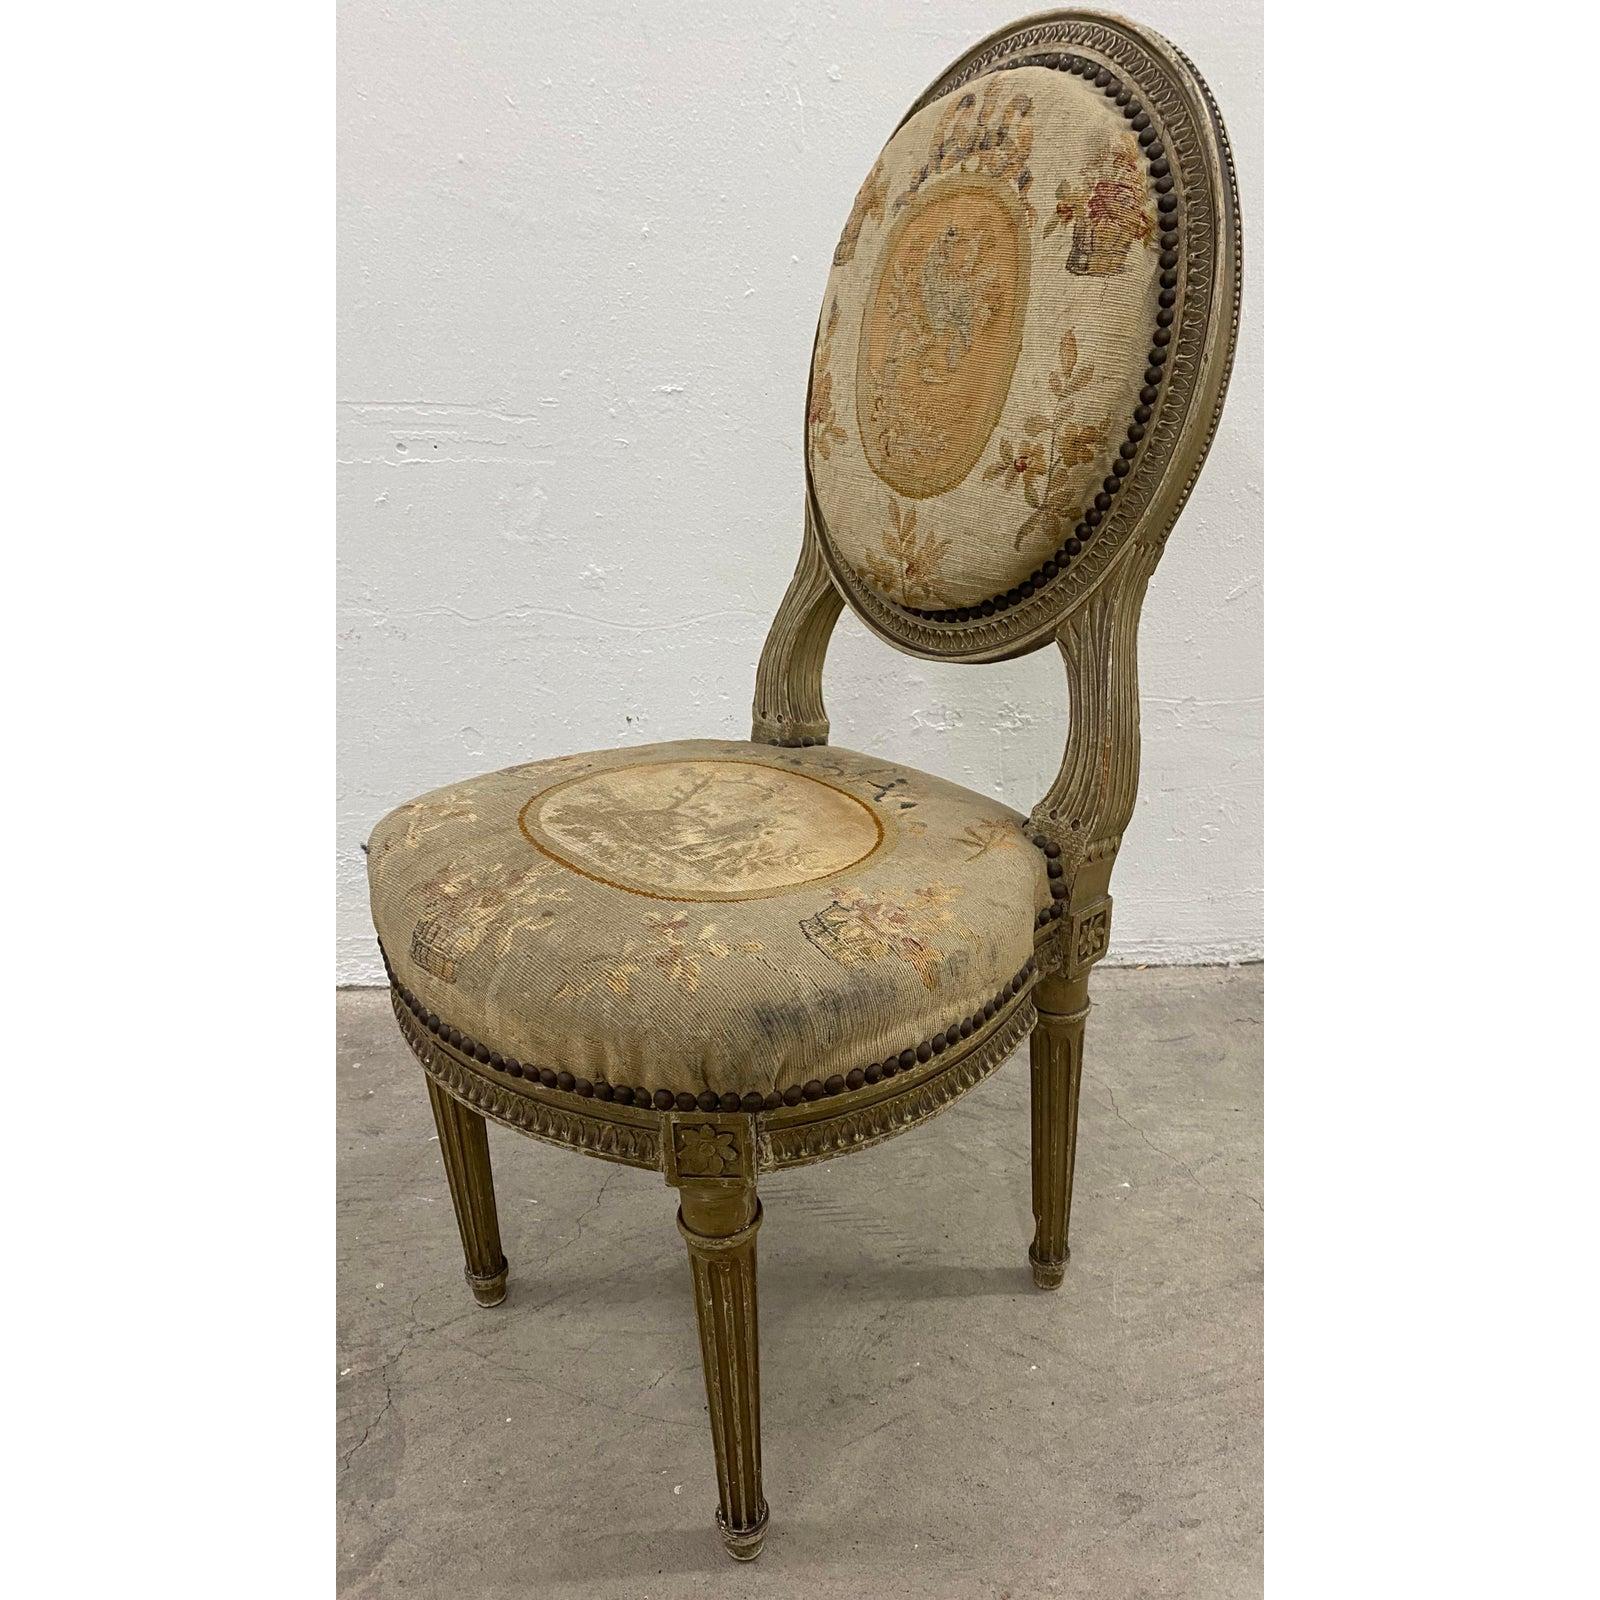 French Louis XVI Child's chair with original Aubusson upholstery, circa 1890

The original Aubusson upholstery is a bit faded after the past 130+ years; the back support shows a dove in a tree and the seat shows a lamb at rest.

Hand carved,